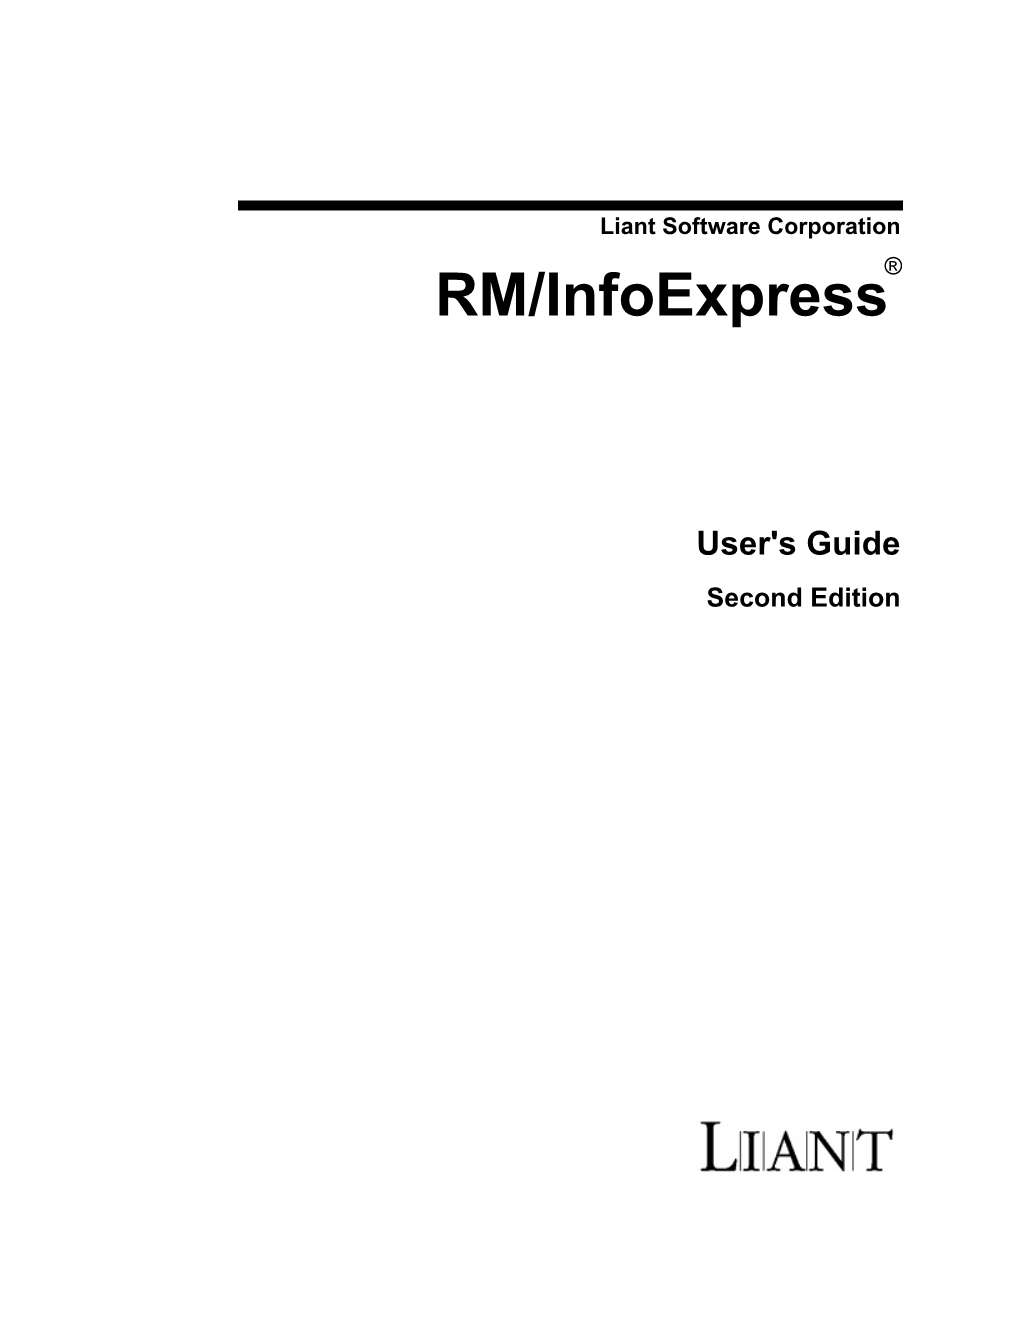 RM/Infoexpress User's Guide (Second Edition)